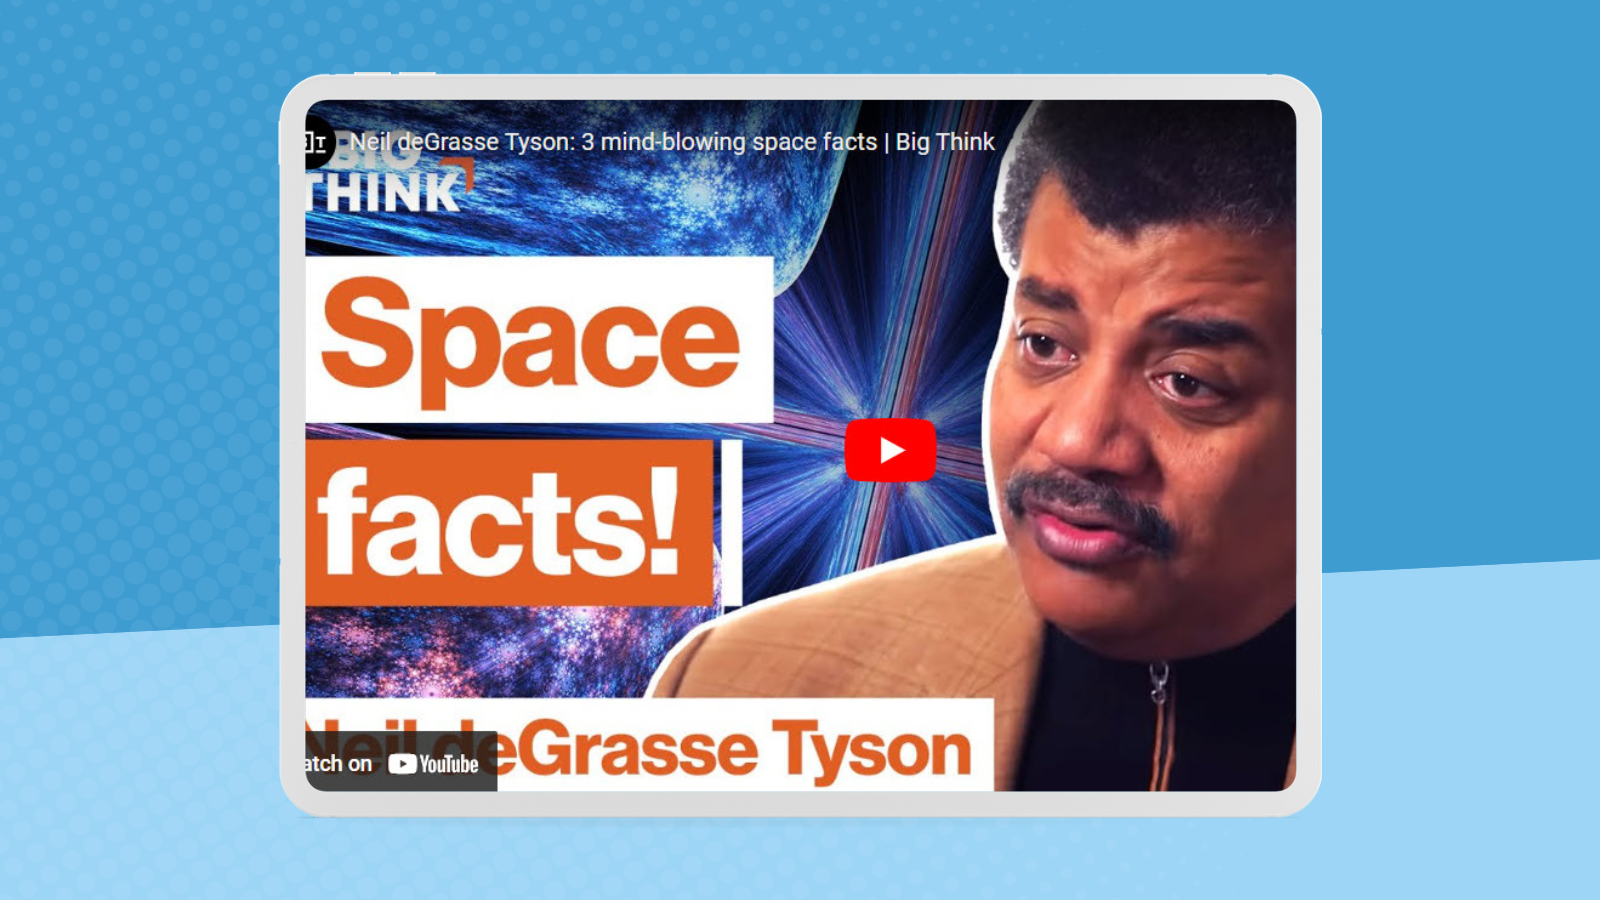 Educational YouTube Channels, with a still from a video featuring Neil deGrasse Tyson talking abut space facts